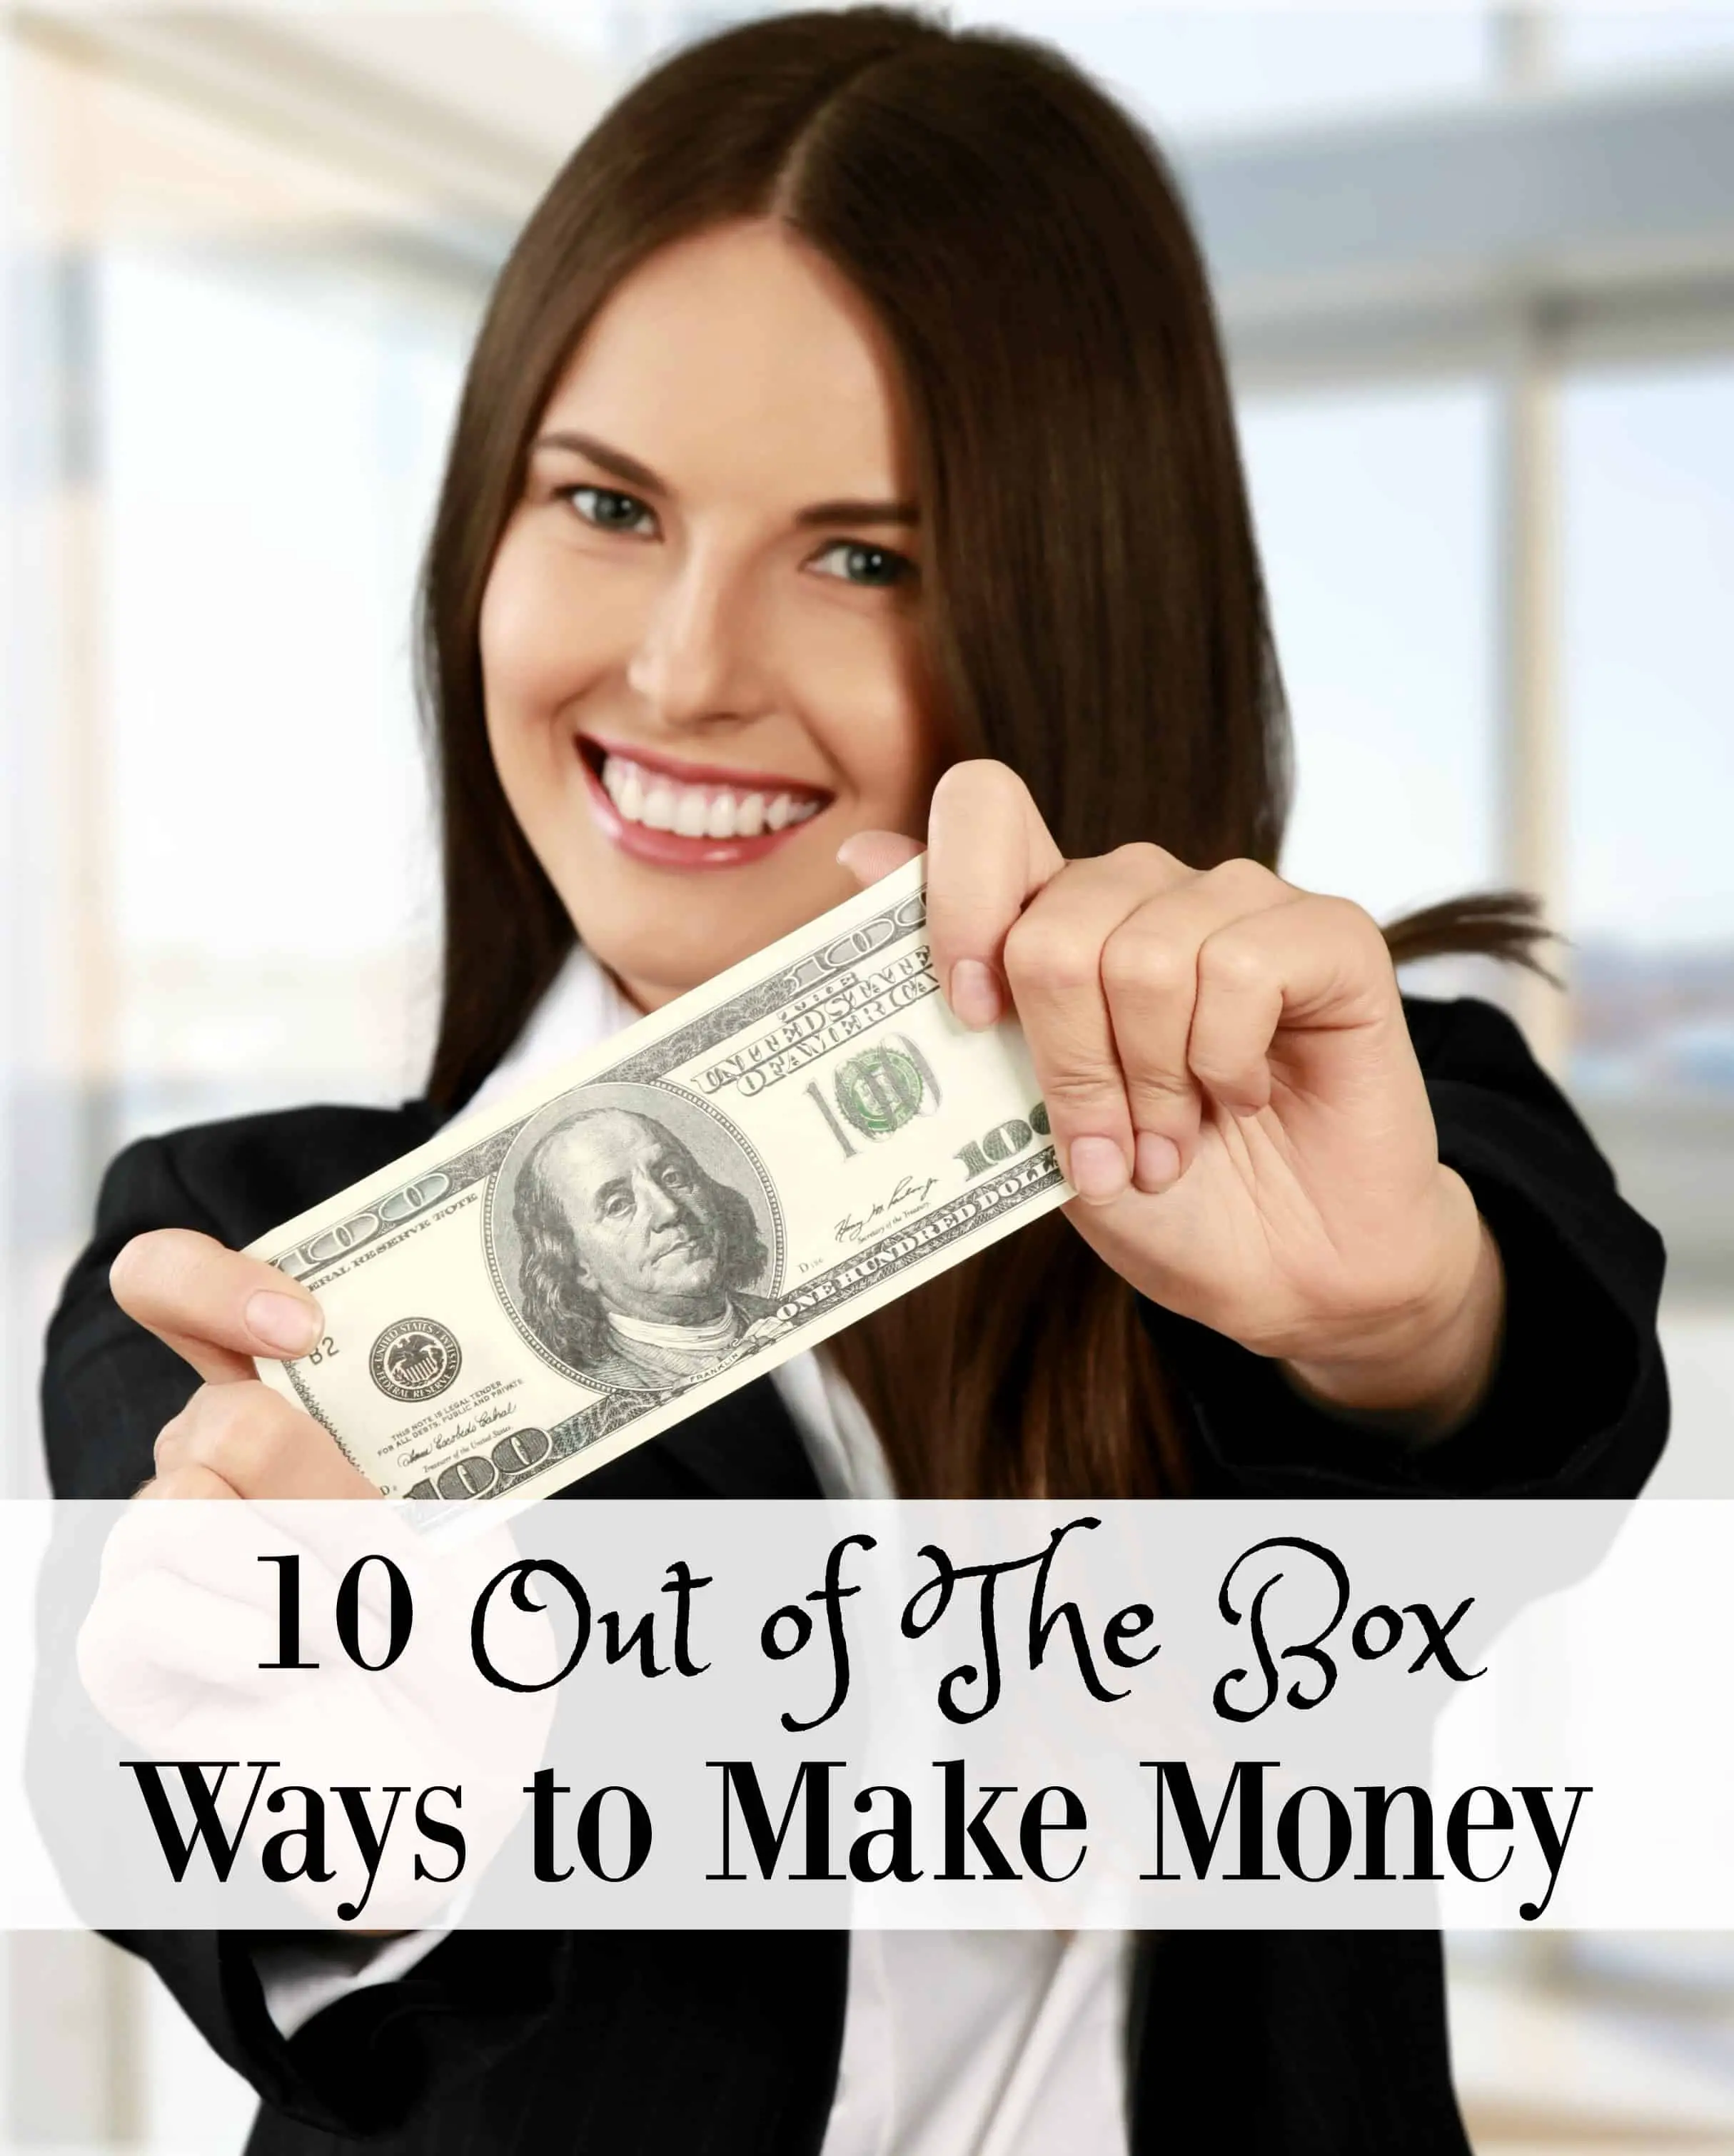 10 Out of The Box Ways to Make Money